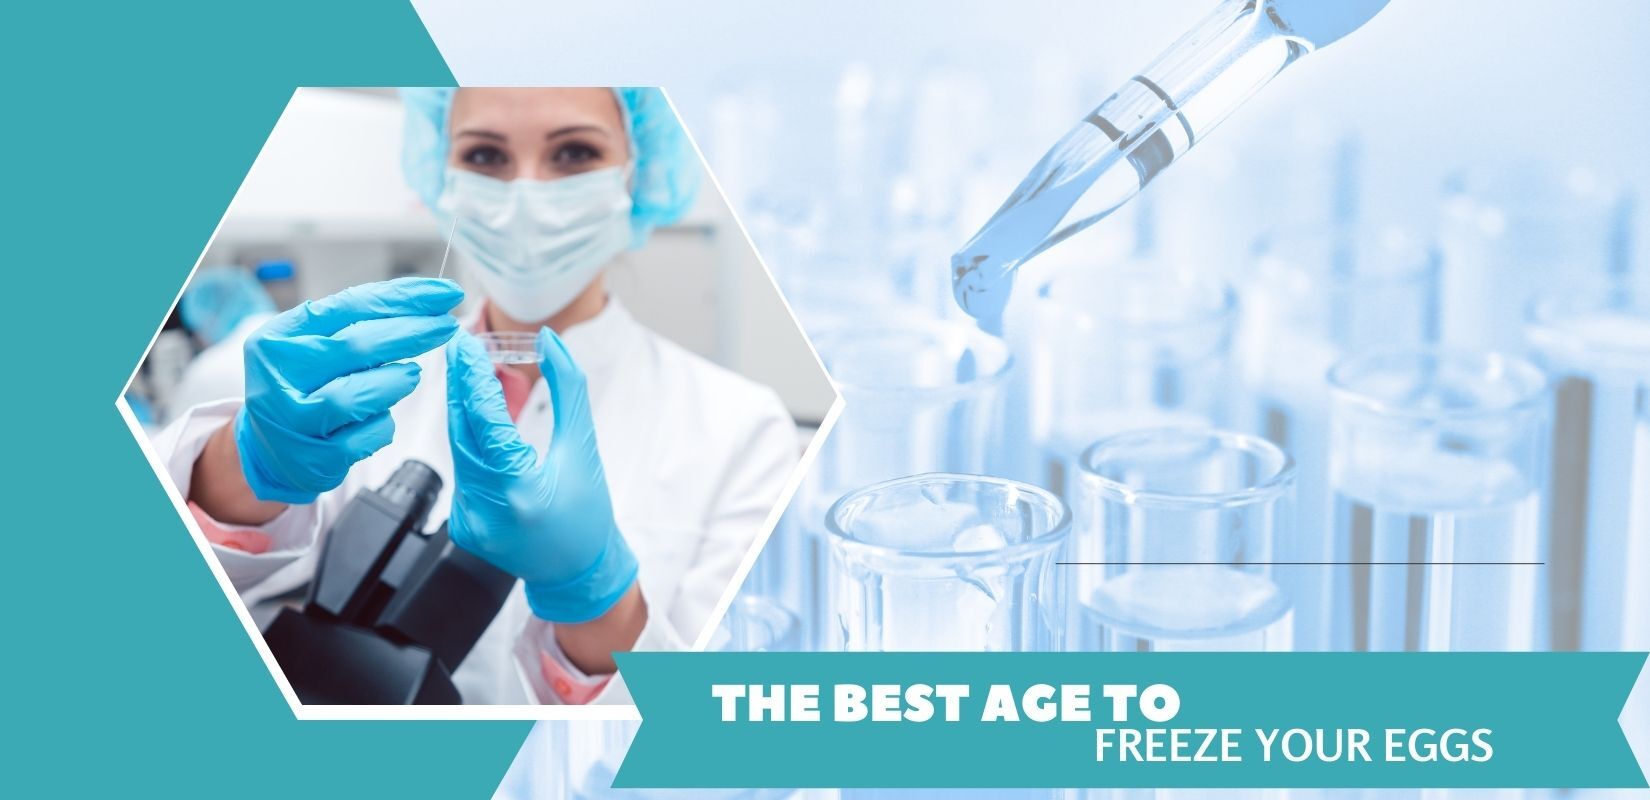 The Best Age to Freeze Your Eggs